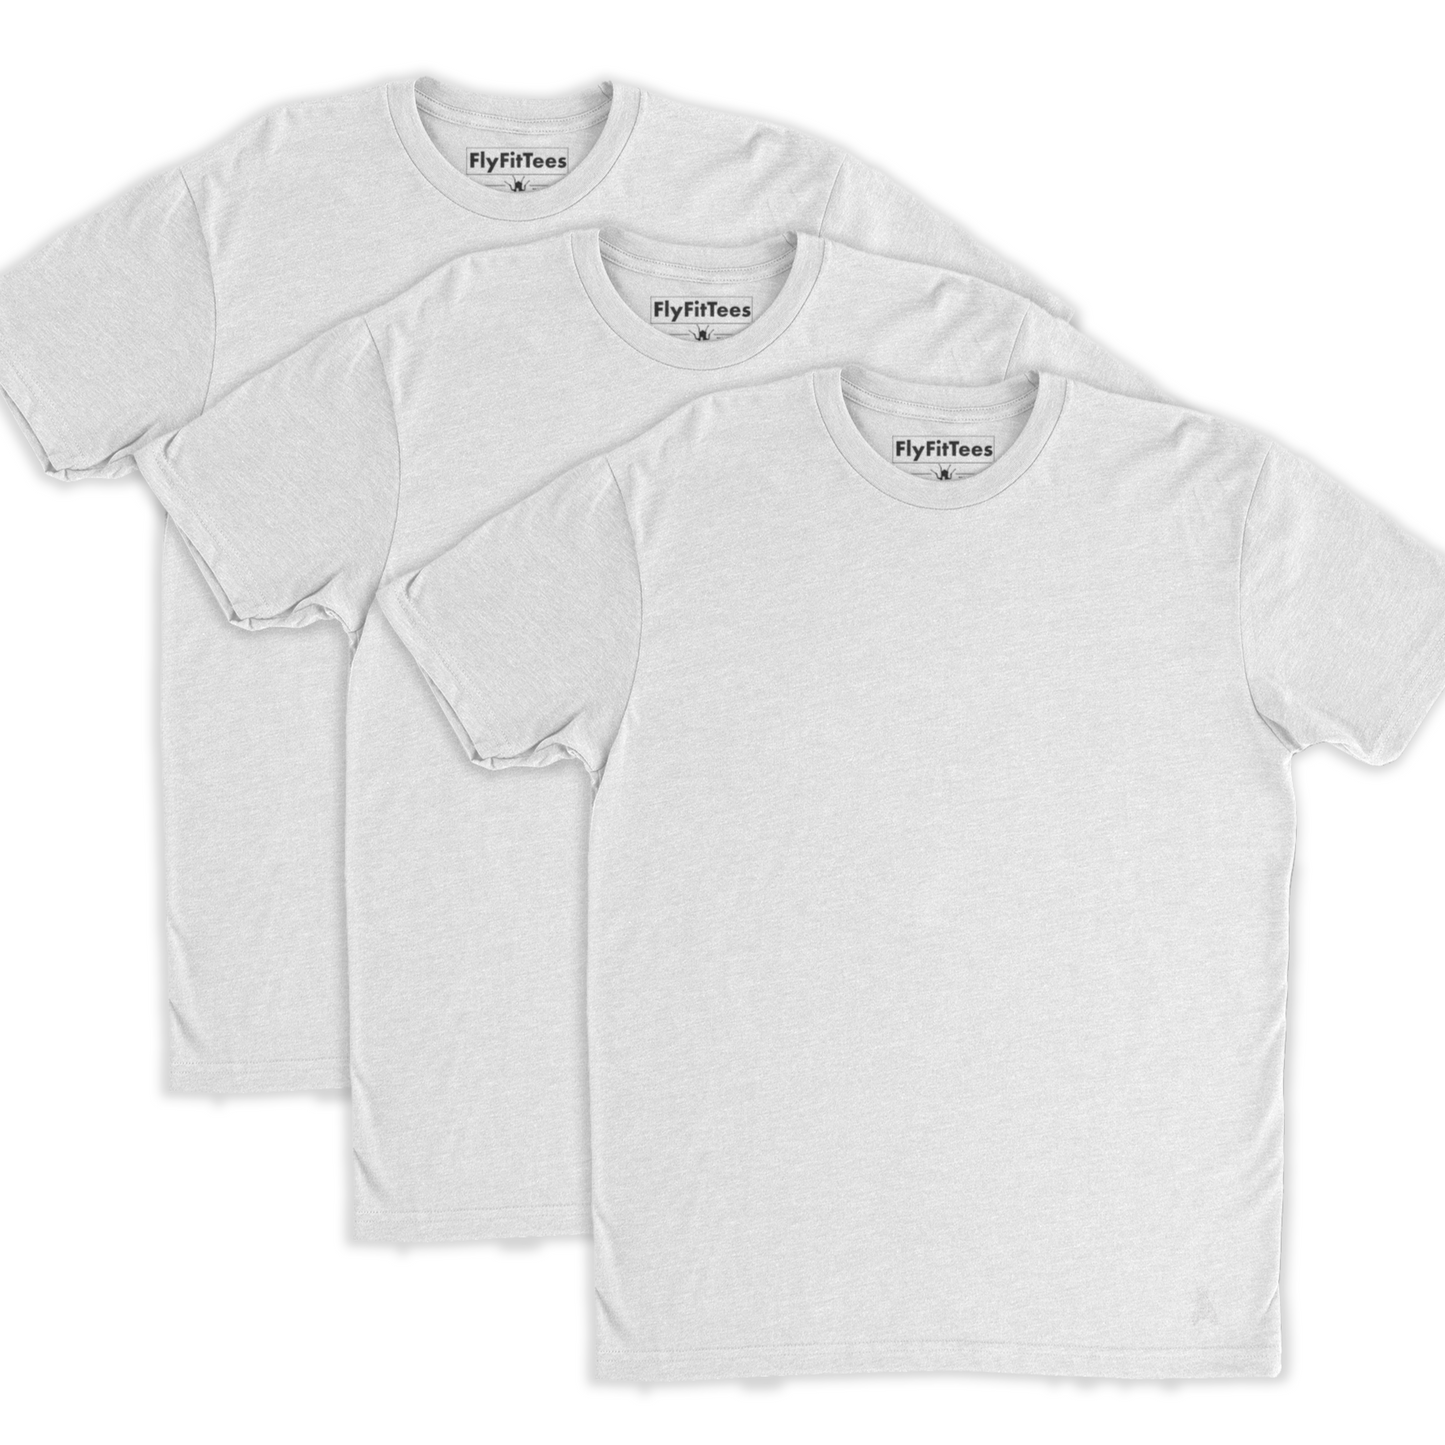 SoFly Original Perfect Fit Tee - 3 Pack - One Color